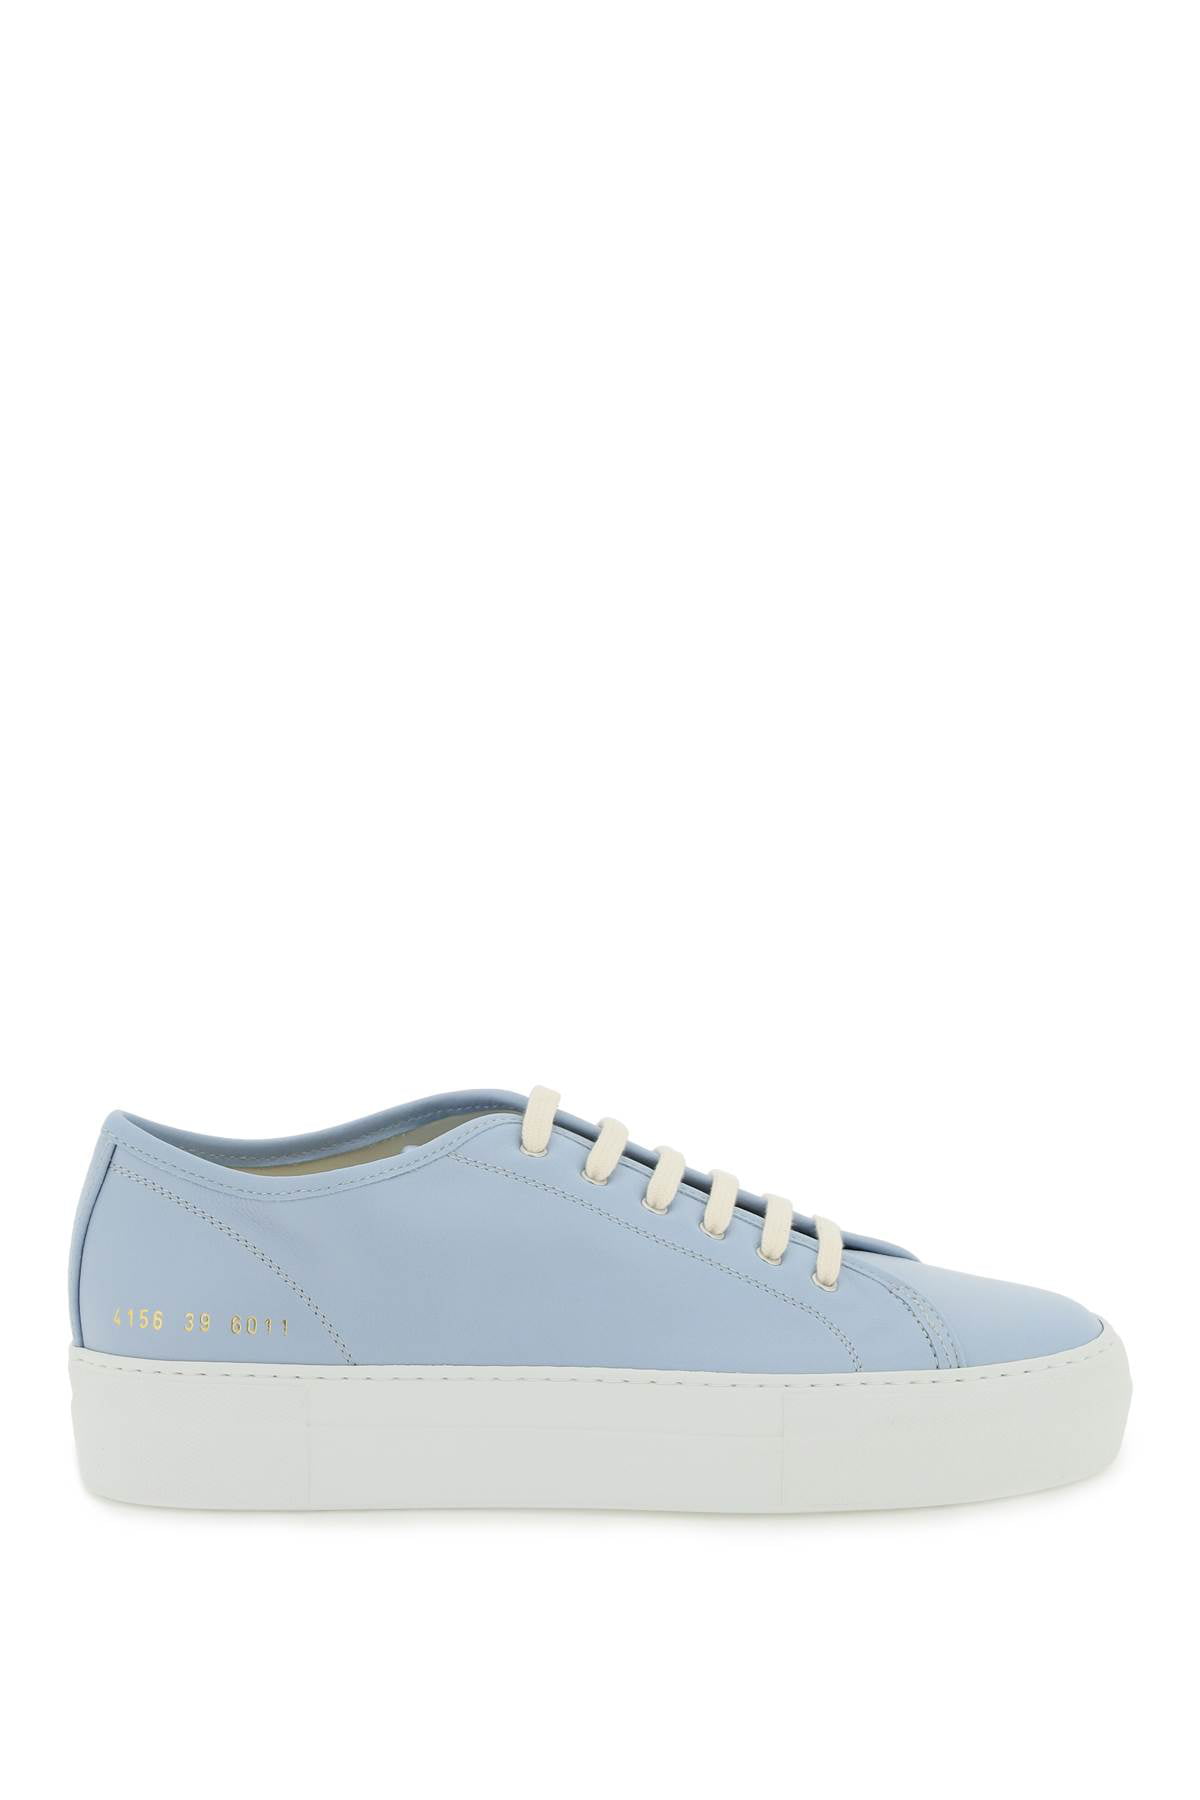 Airfield zebra Match Common projects leather tournament low super sneakers - Walmart.com